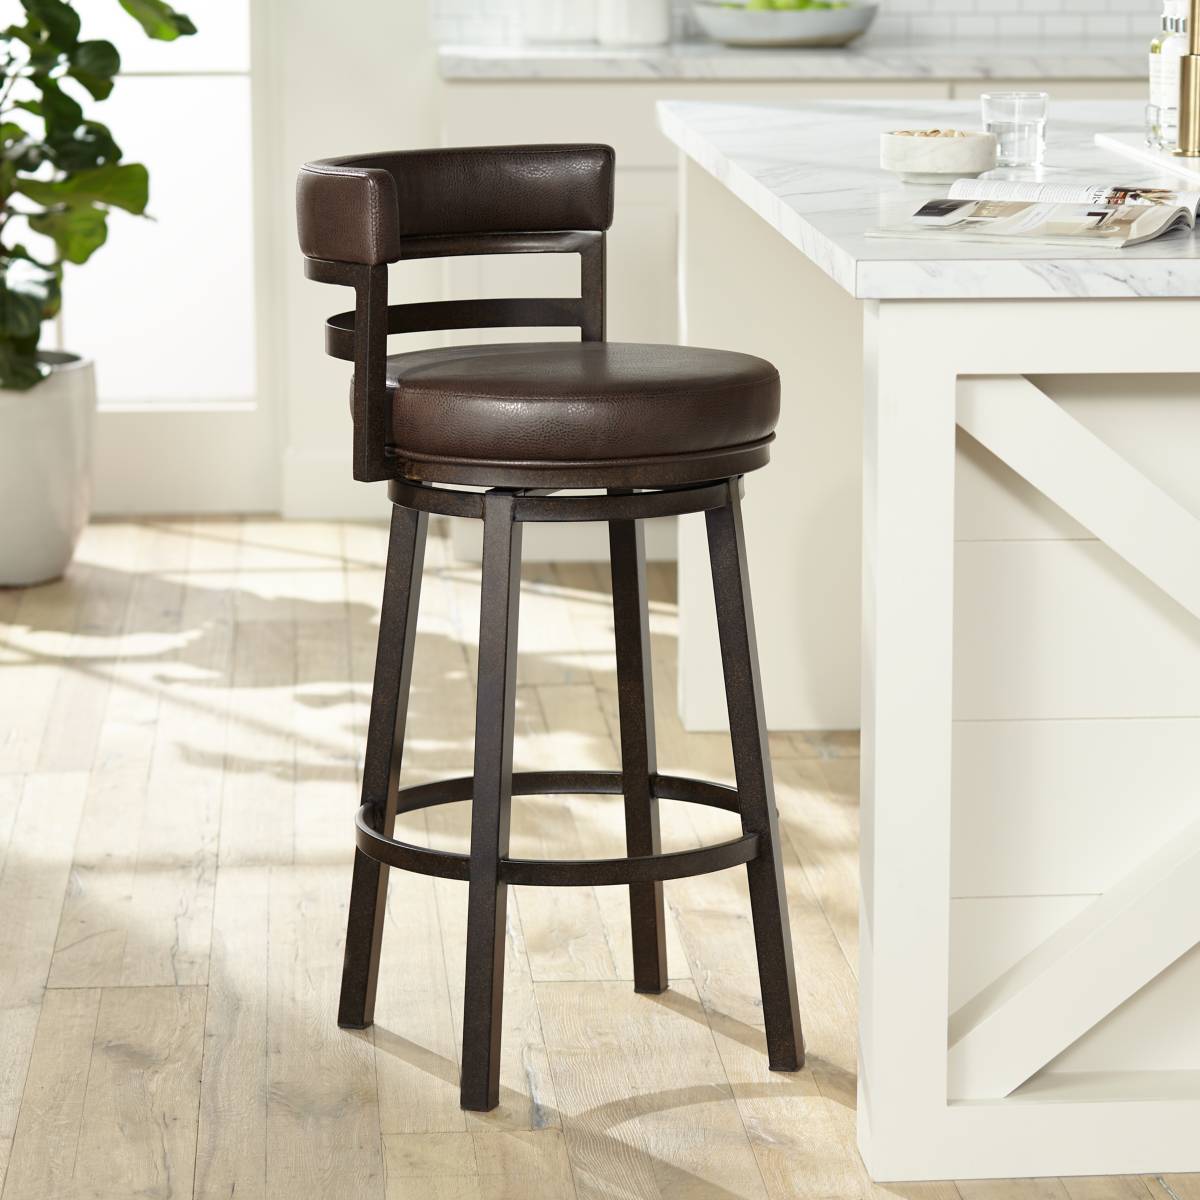 Bar Height Stools 28 To 32 In, Lamps Plus Backless Counter Stools